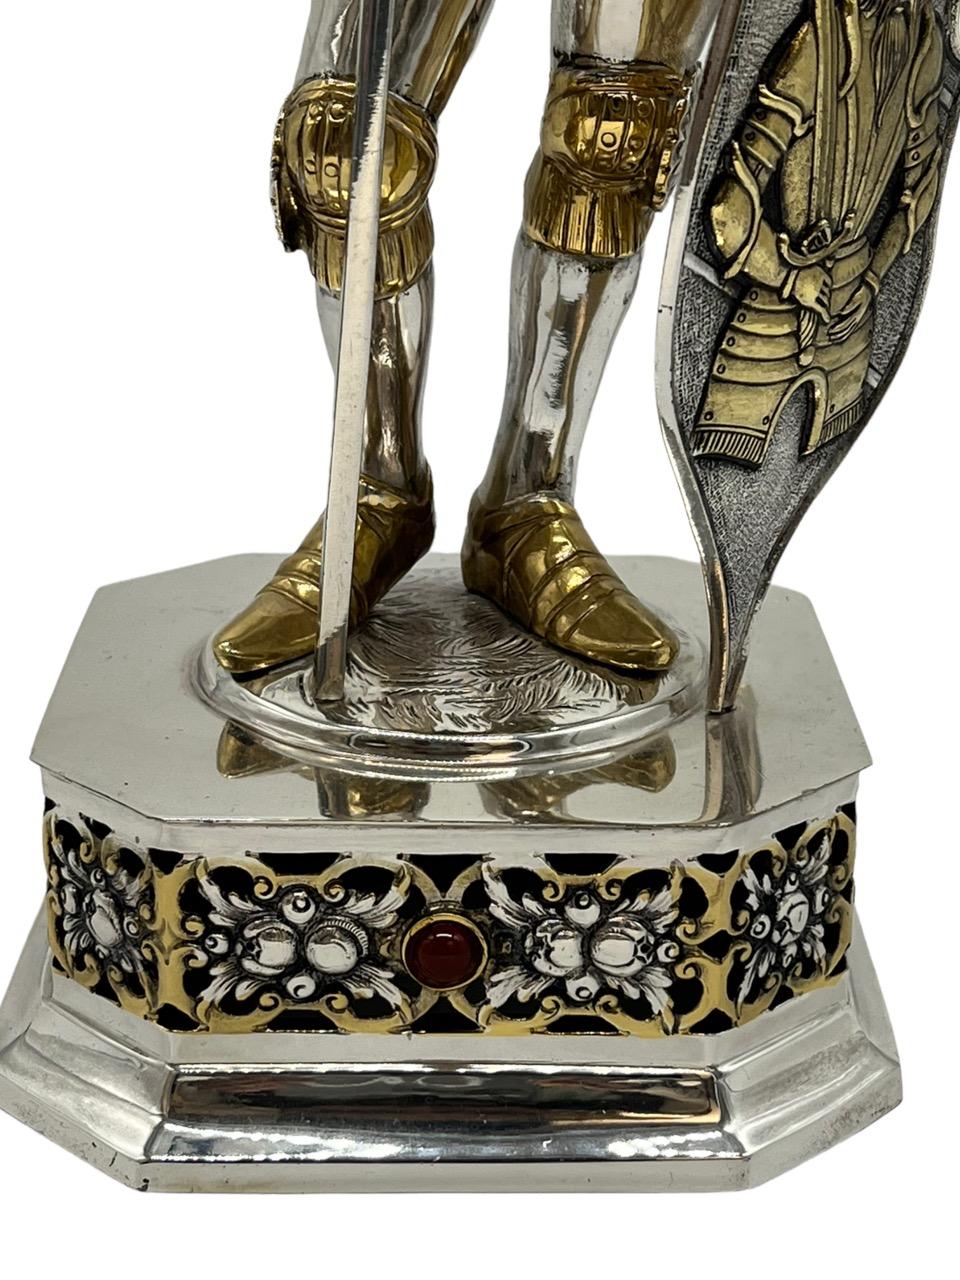 19th Century German extremely detailed sterling silver and gold gilt knight figure. Knight in full suit of armour, carved face beneath a hinged visor made of white bone. The knight is holding an axe and a a shield, chased with armorials. It is